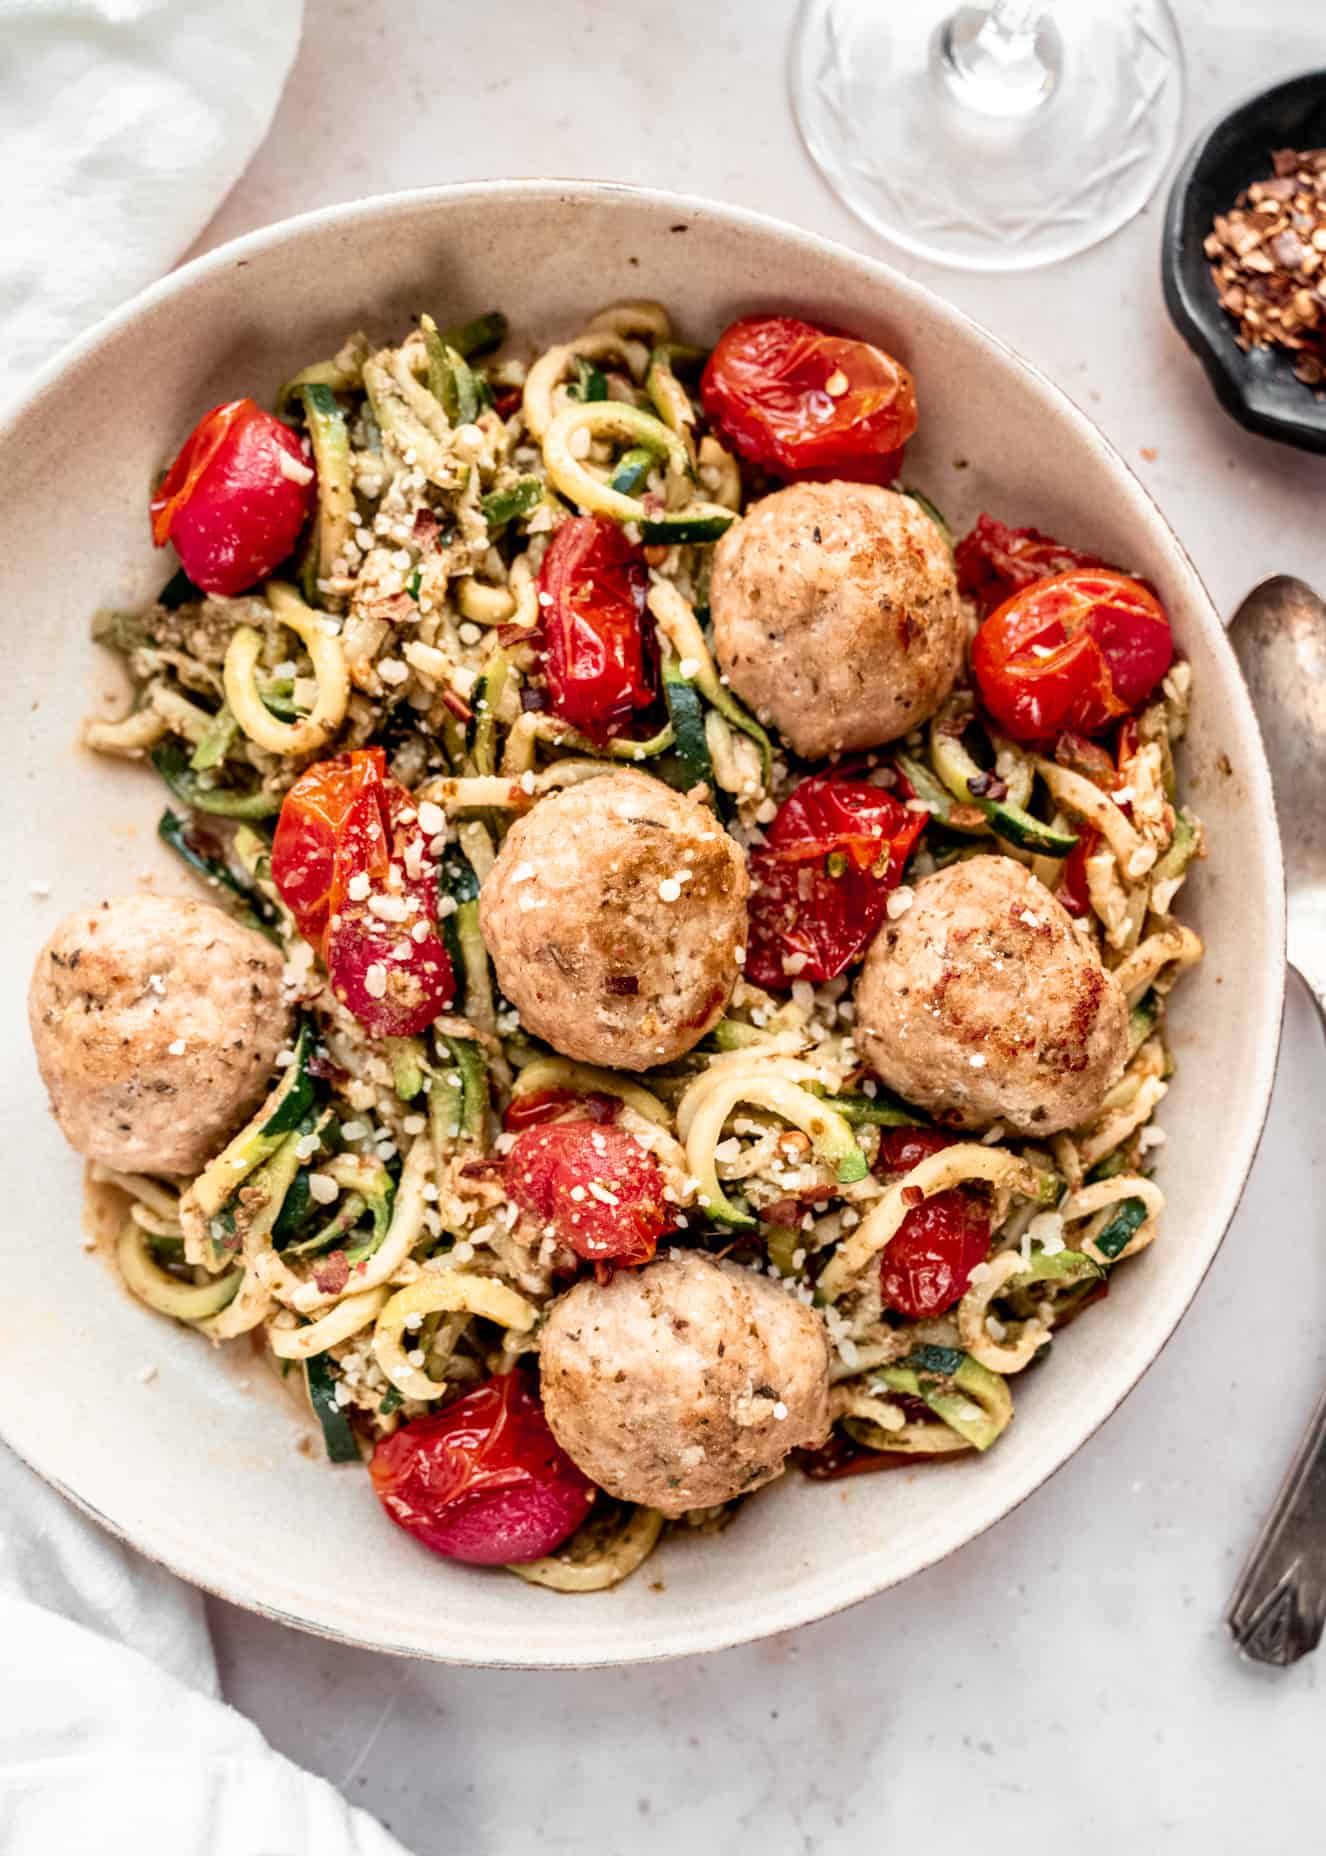 Pesto Zucchini Noodles with Baked Meatballs - The Windy City Dinner Fairy